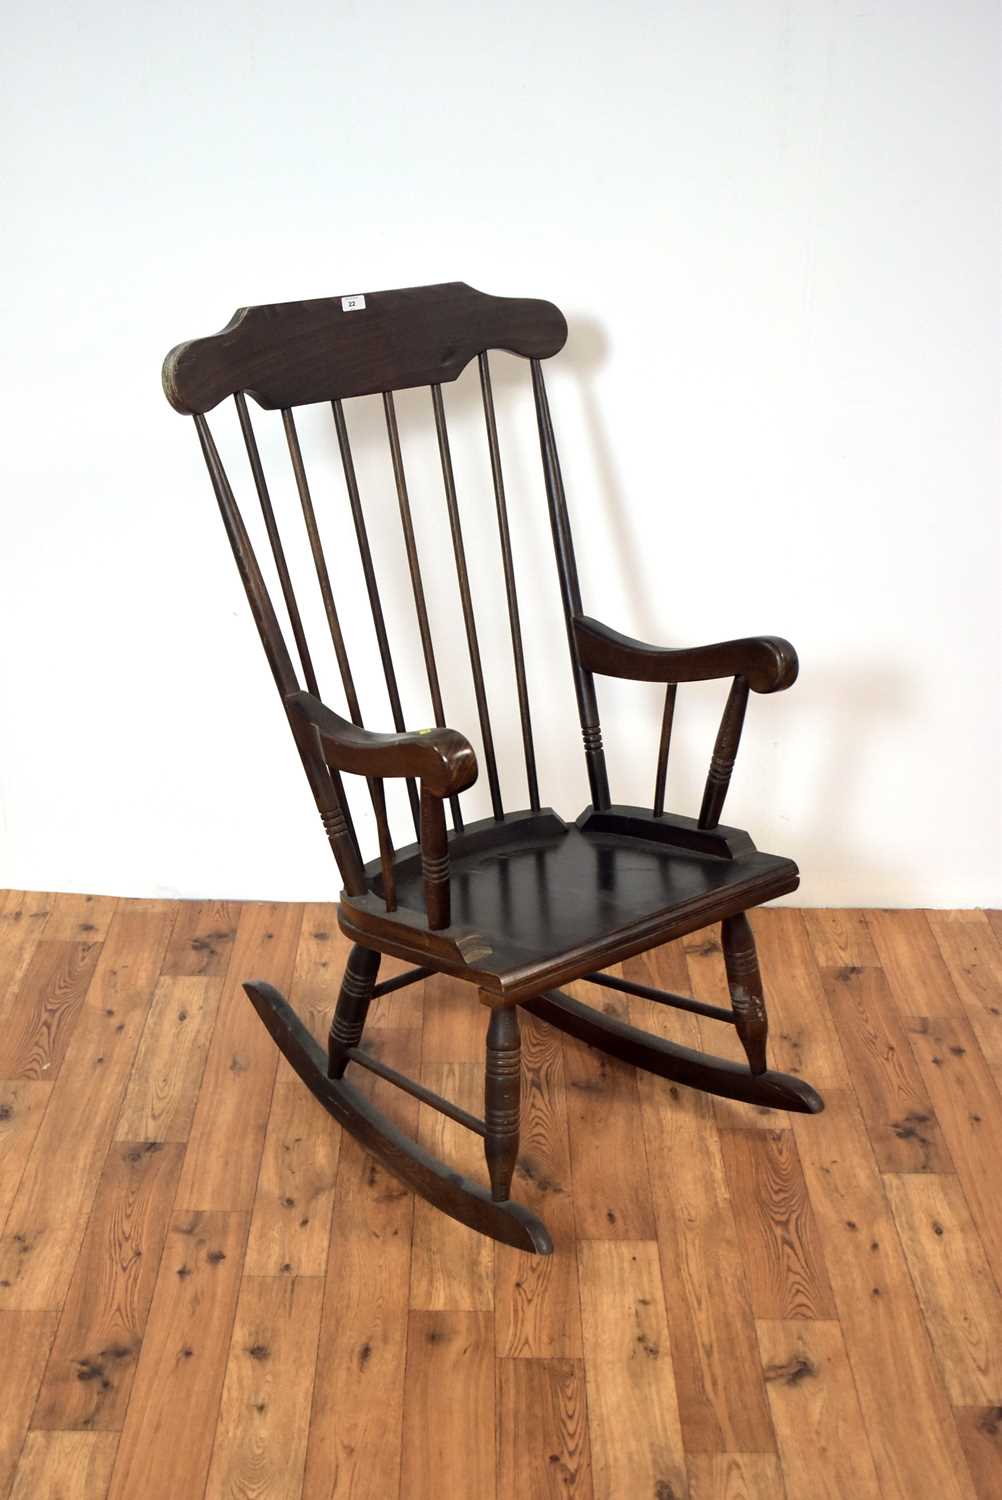 A 20th Century mahogany rocking chair - Image 3 of 3